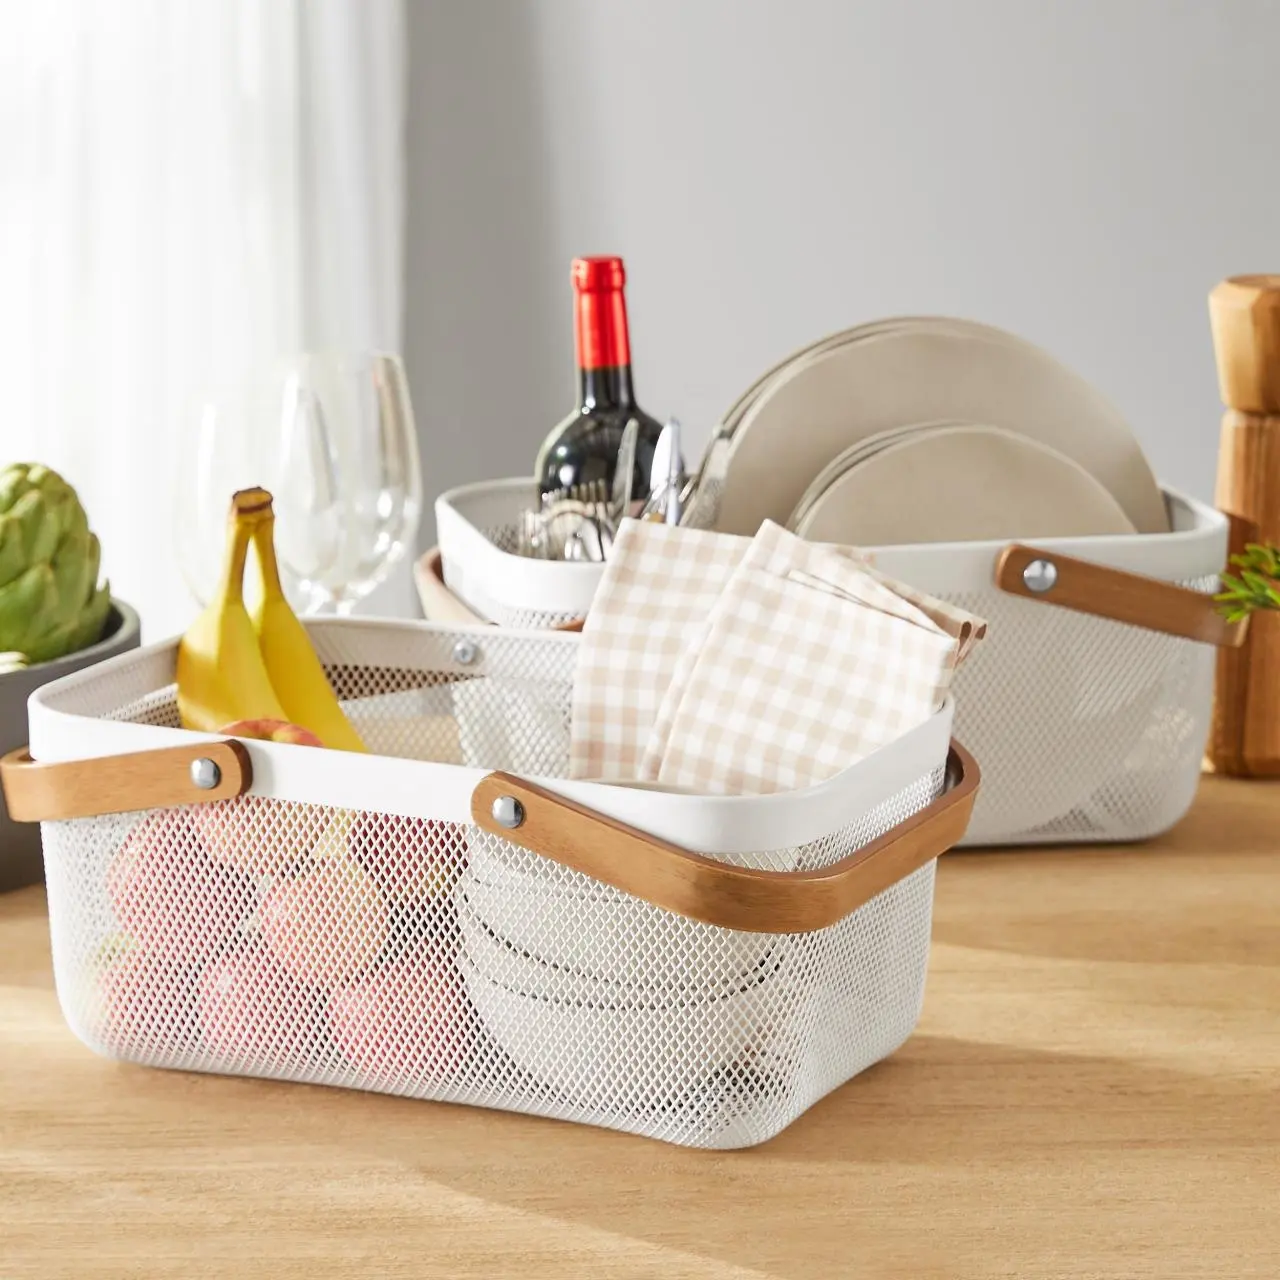 Picnic Basket Gift Decorative Mesh Metal Wire Bread Fruit Vegetable Storage Basket with Wooden Handle